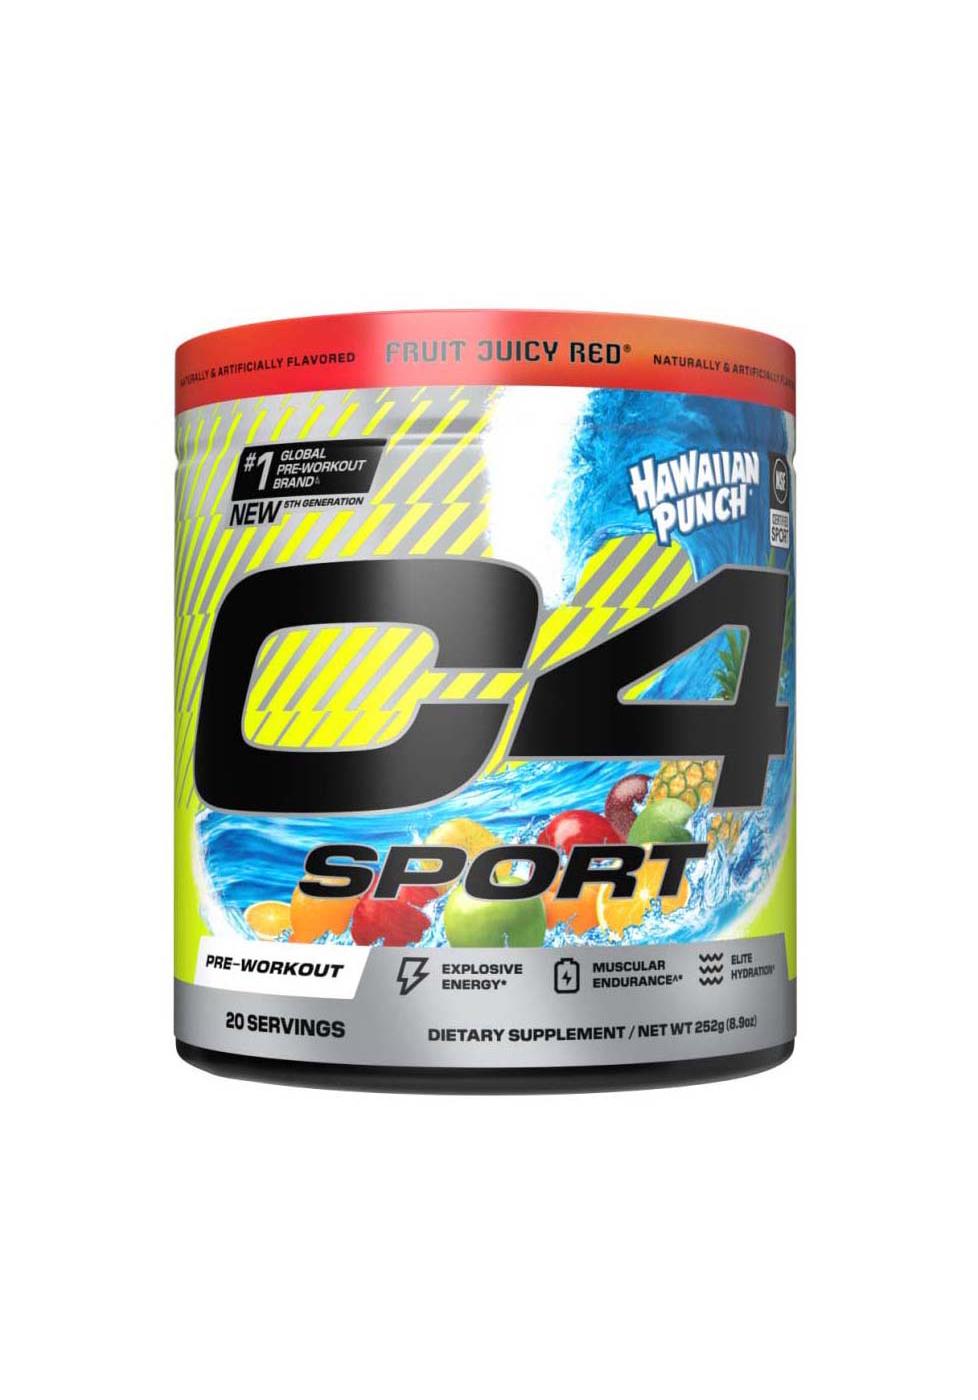 Cellucor C4 Sport Pre-Workout - Hawaiian Punch Fruit Juicy Red; image 1 of 12